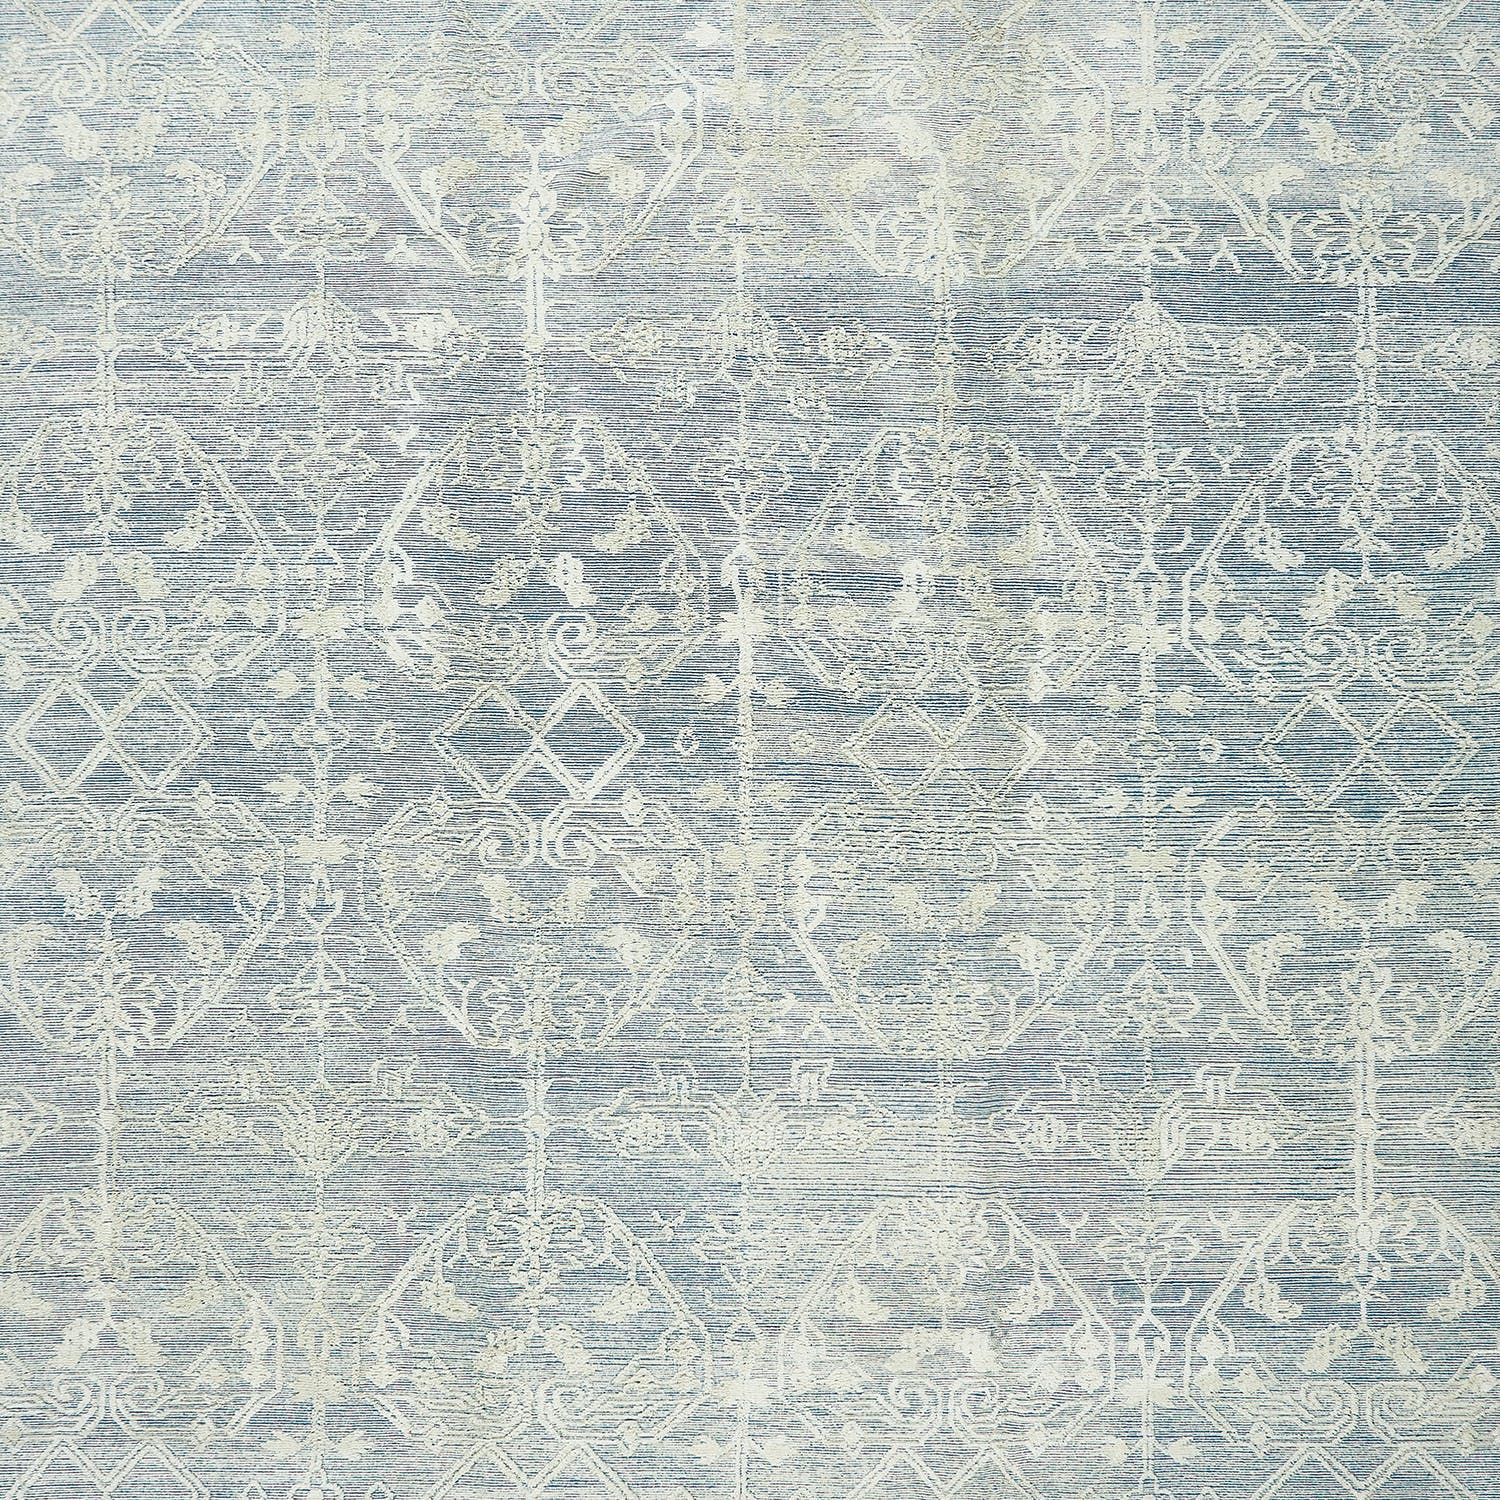 Vintage-inspired textured surface with symmetrical motifs in muted blues.